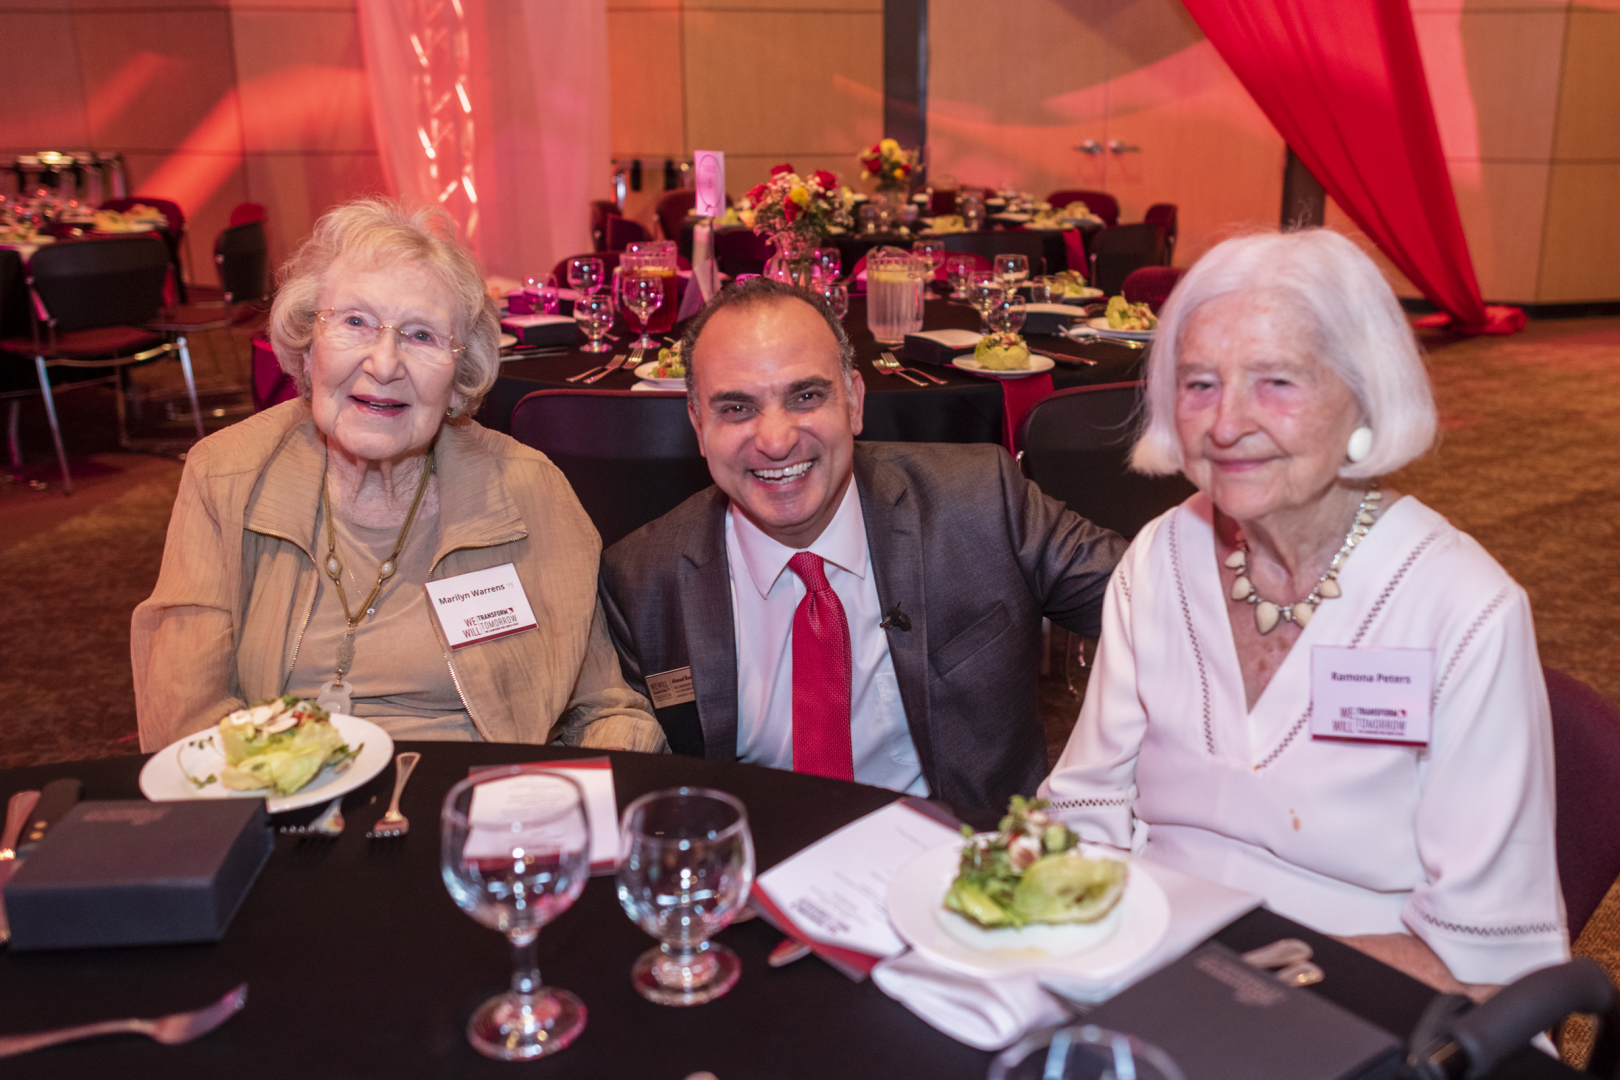 Marilyn Warrens sits with Ahmad Boura and another donor at the University's Campaign launch event.